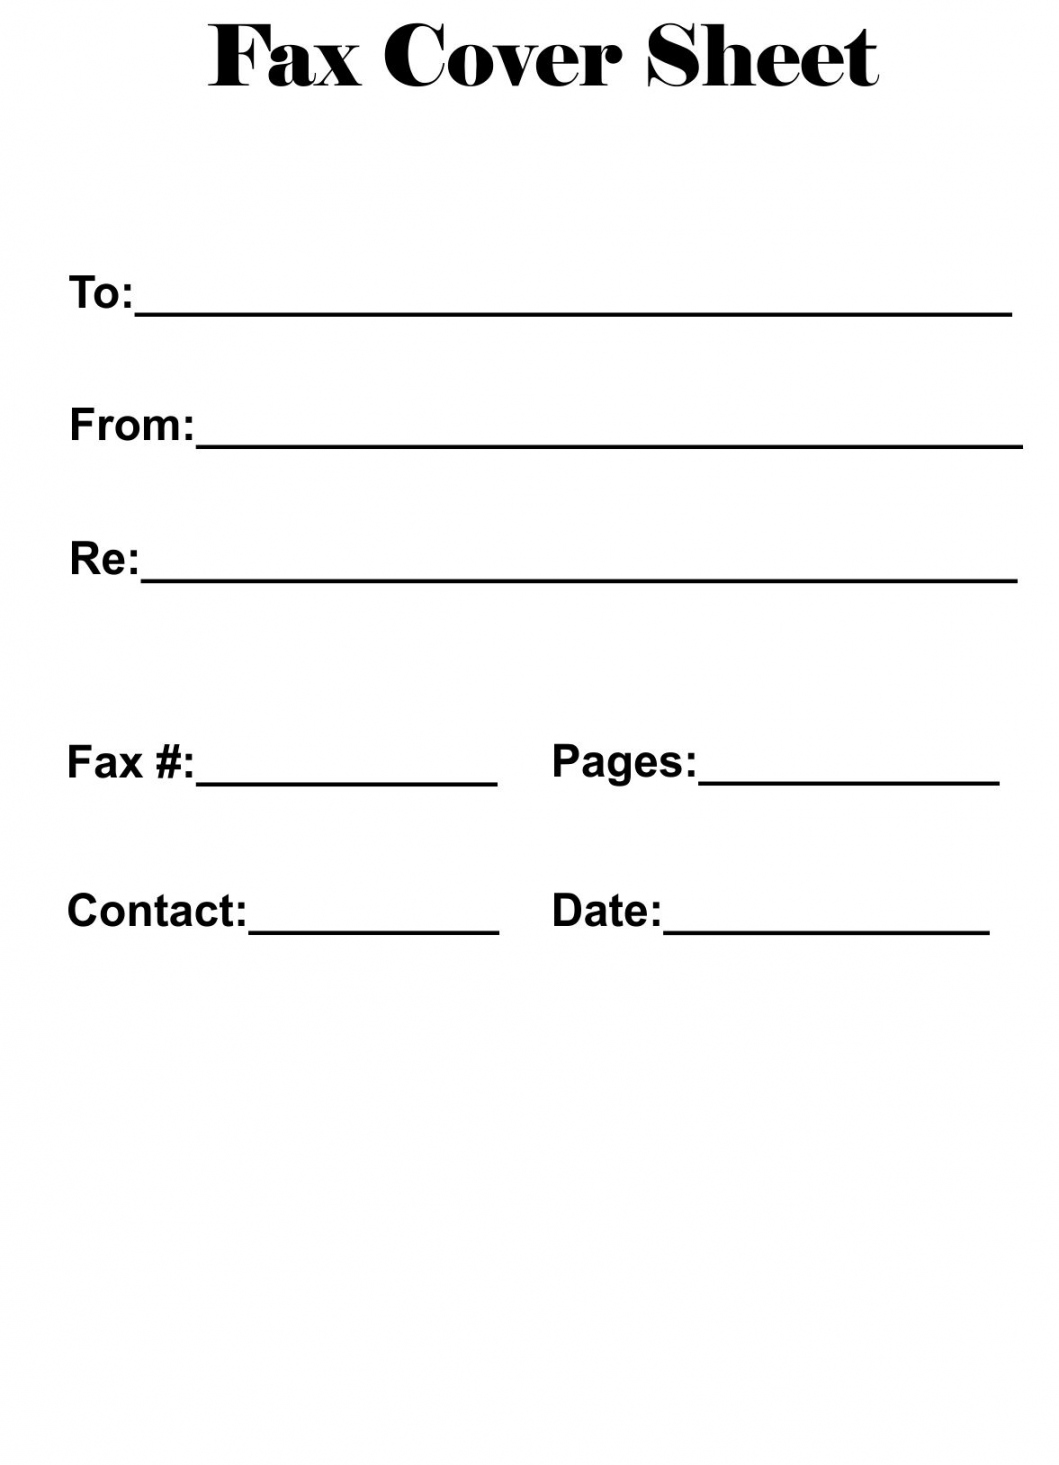 Printable Fax Cover Sheet Free - Printable - Fancy Fax Cover Sheet Template  Fax cover sheet, Cover sheet